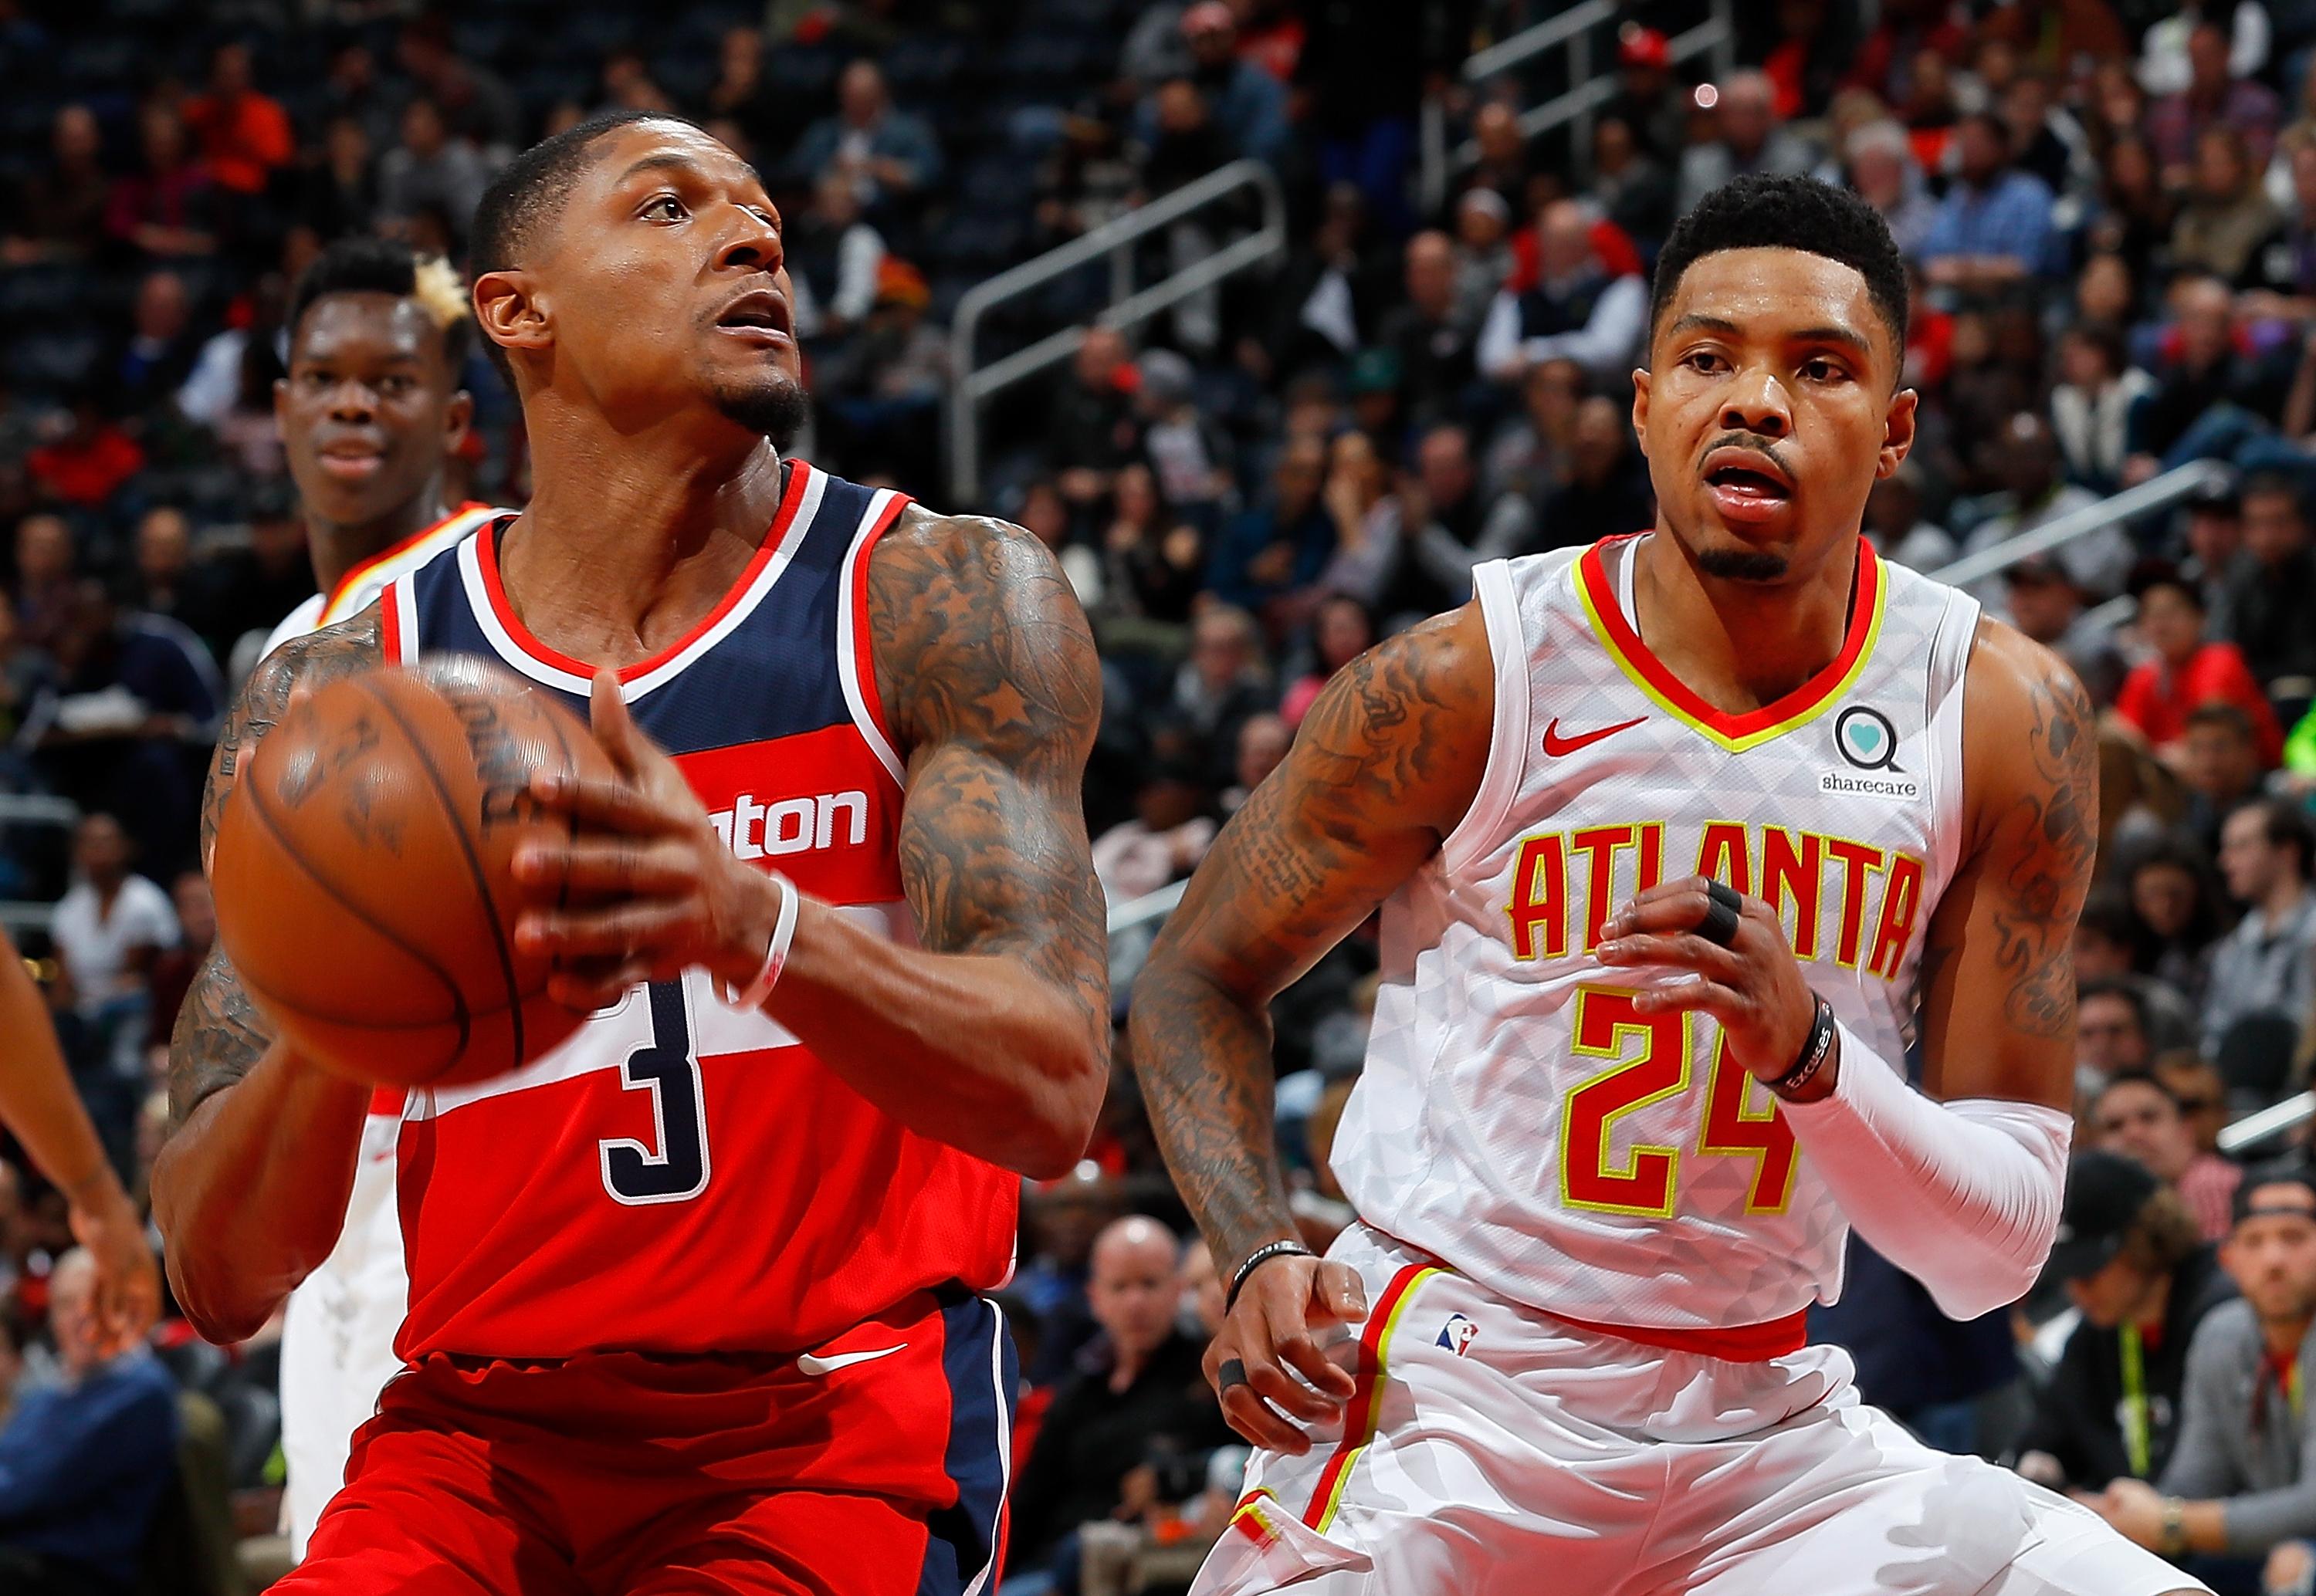 Bradley Beal Responds To Kent Bazemore’s Comment: “You A Straight Lame”